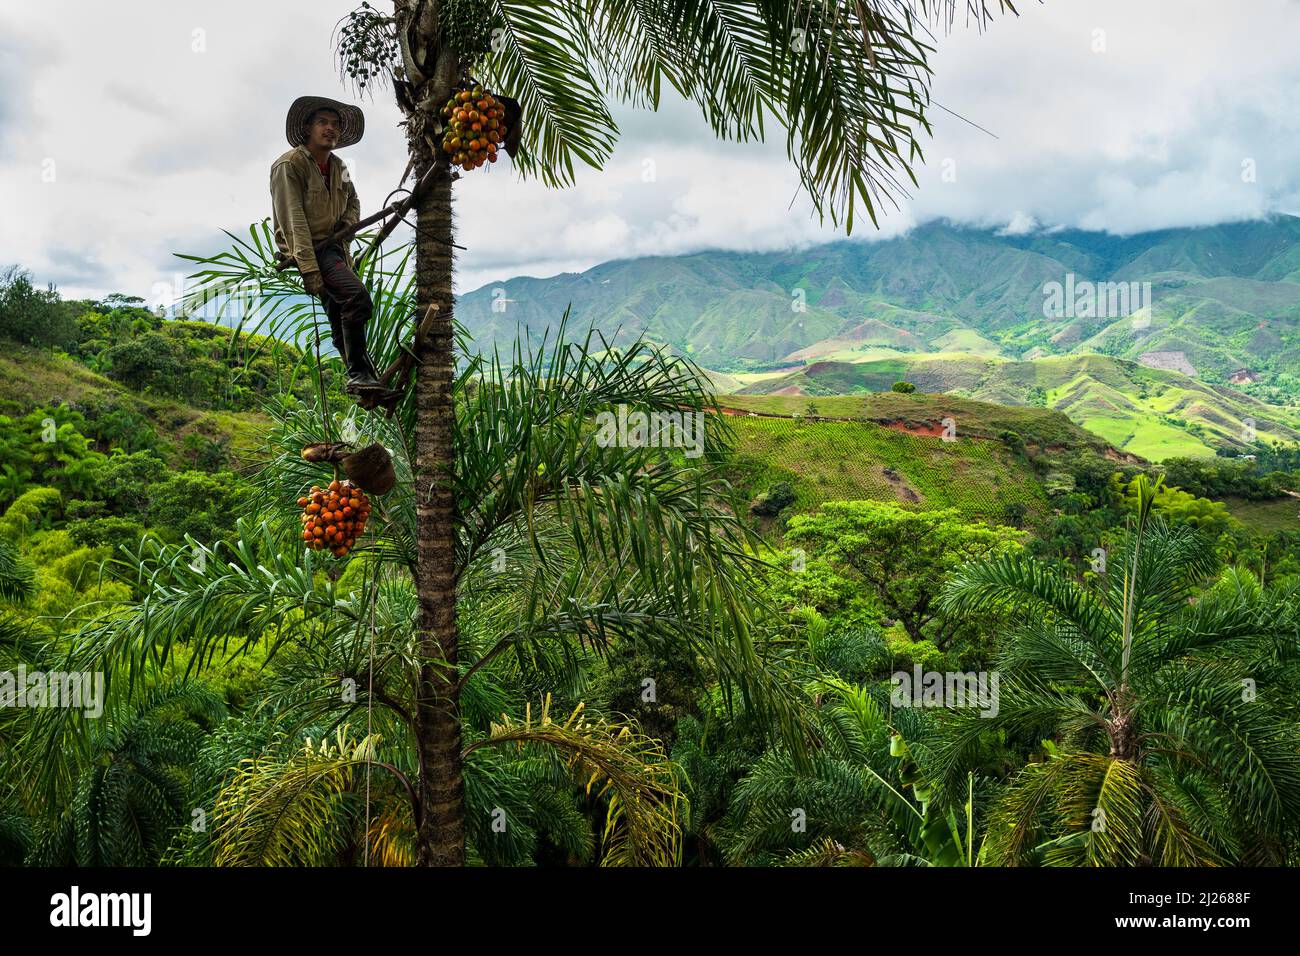 A Colombian farmer, climbing a peach palm tree, lowers a bunch of harvested chontaduro fruits on a farm near El Tambo, Colombia. Stock Photo